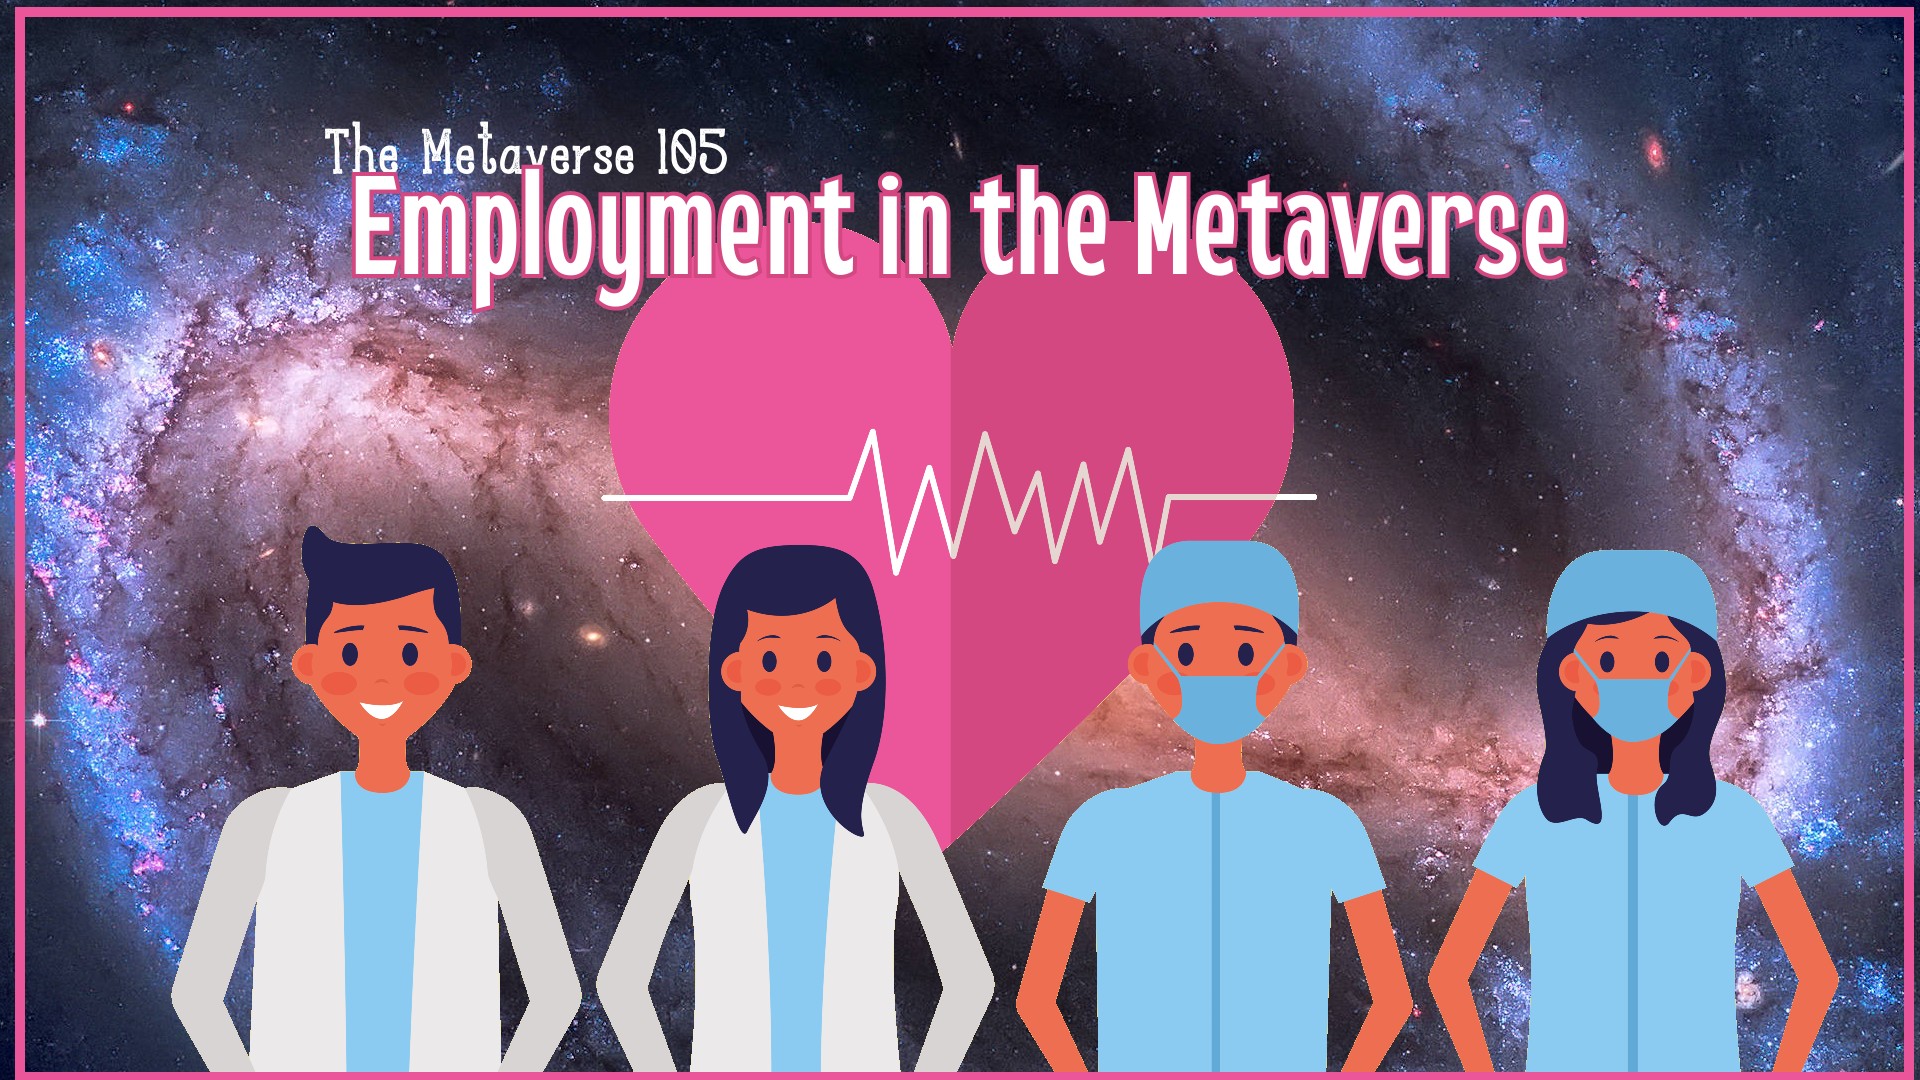 The Metaverse 105: Employment in the Metaverse